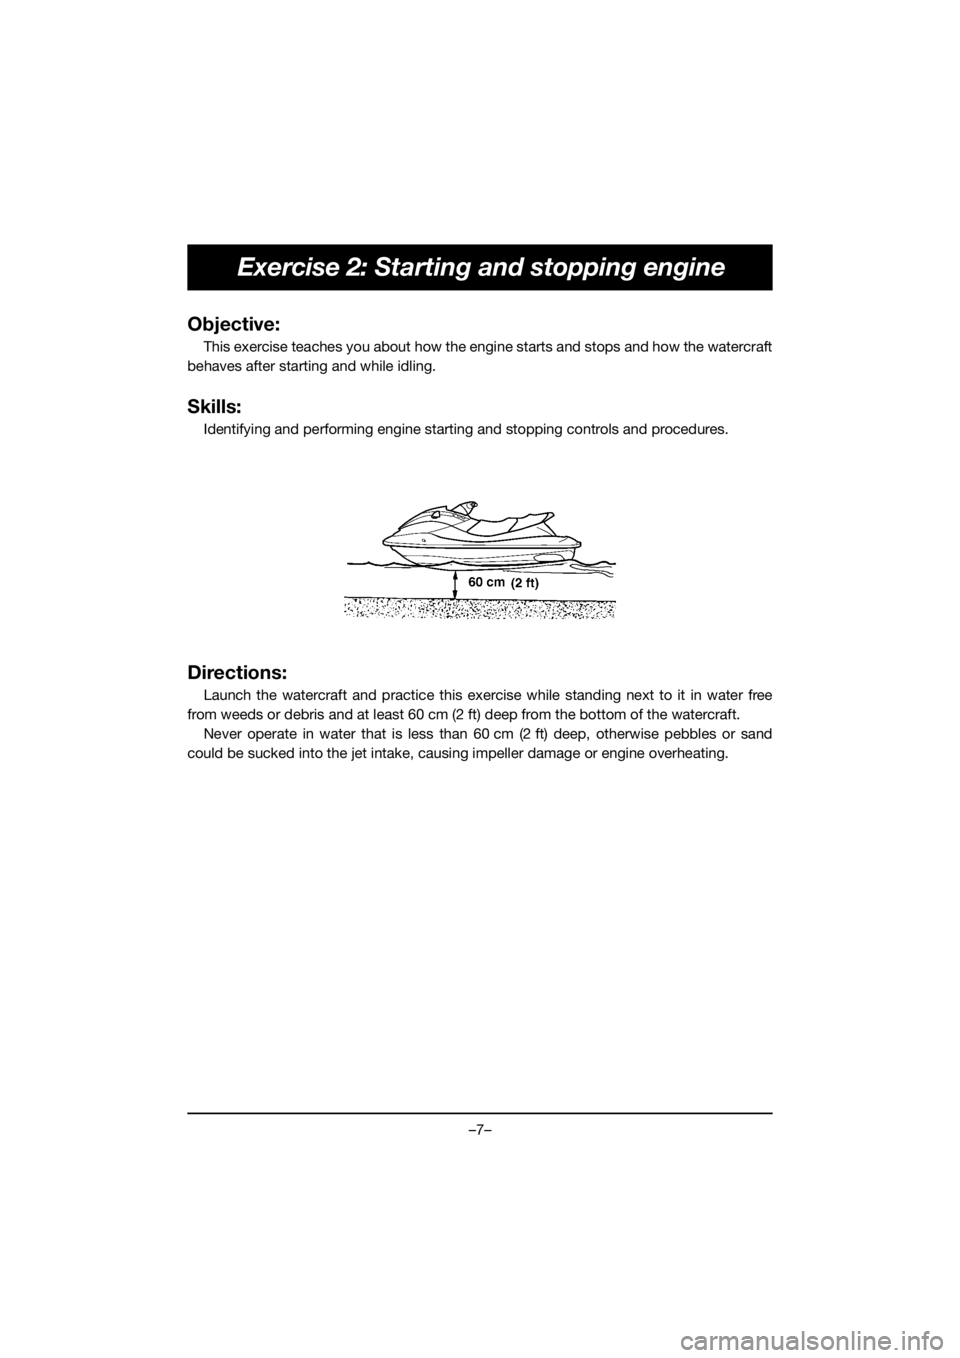 YAMAHA VX DELUXE 2021 User Guide –7–
Exercise 2: Starting and stopping engine
Objective:
This exercise teaches you about how the engine starts and stops and how the watercraft
behaves after starting and while idling.
Skills:
Iden